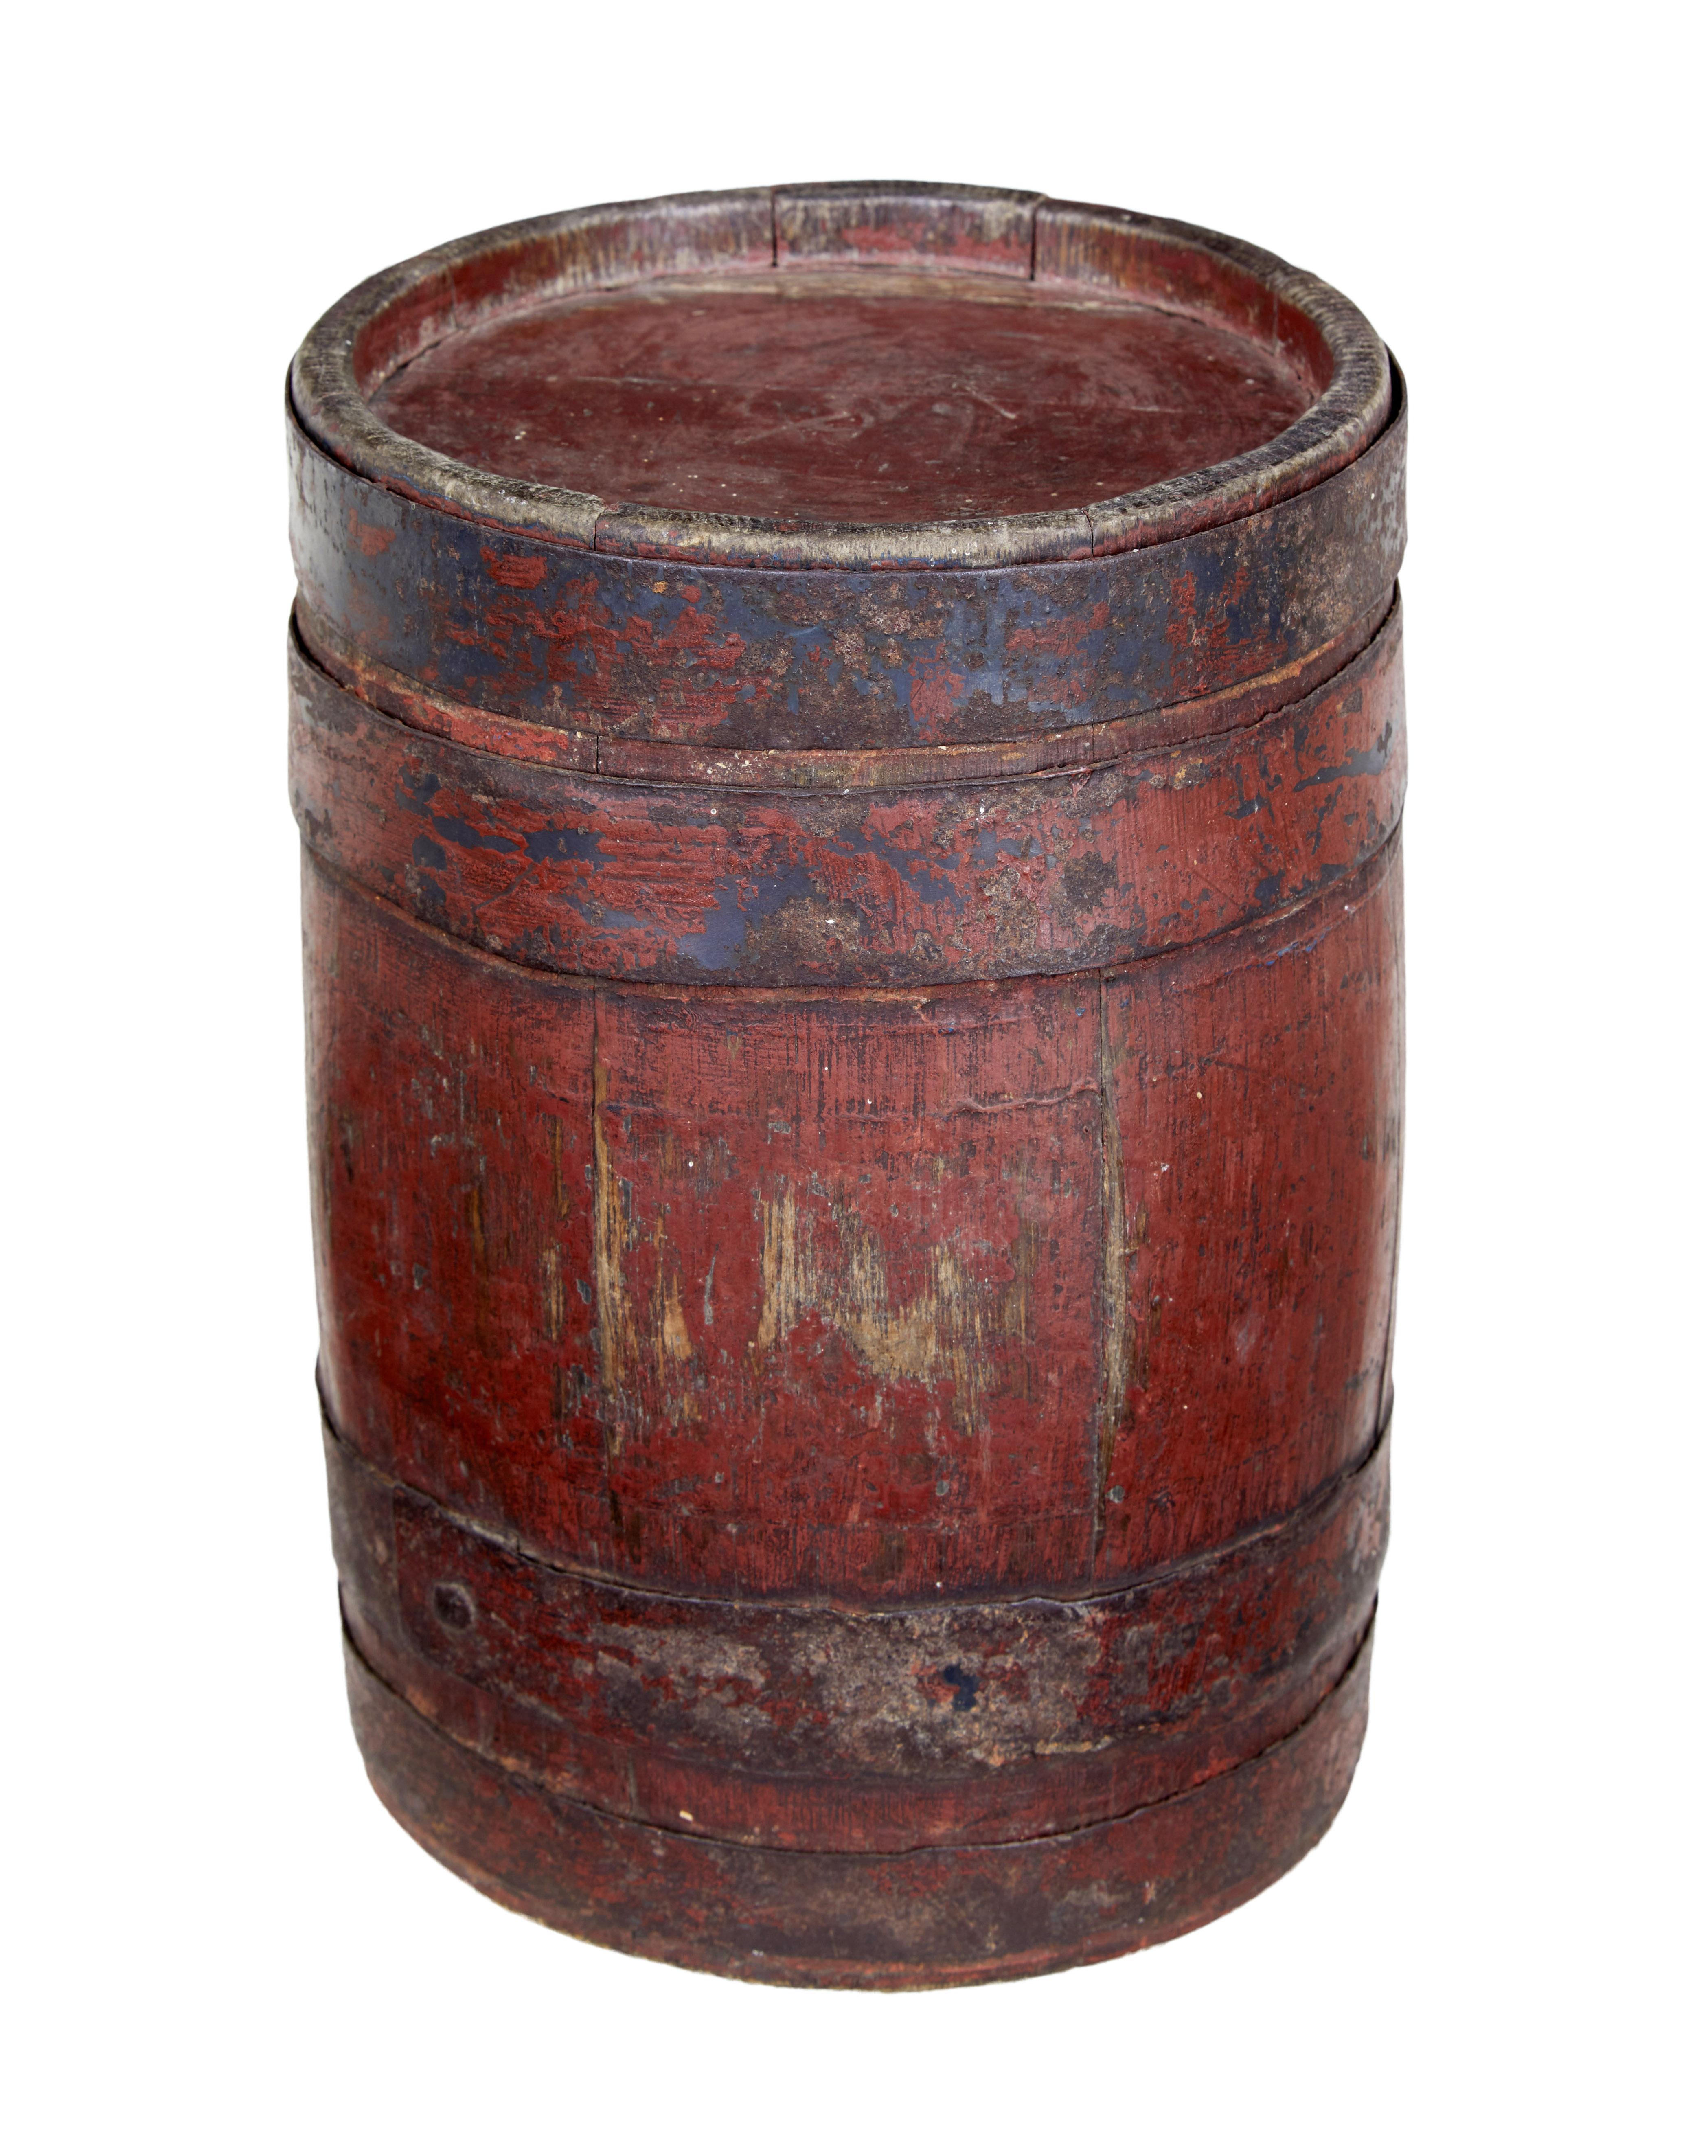 19th century Scandinavian painted oak barrel, circa 1870.

Beautiful miniature oak barrel used for storage and ageing of spirits. Hand painted in traditional colors, with metal strap work. Lead lined entrance to wear the cork is placed. Original